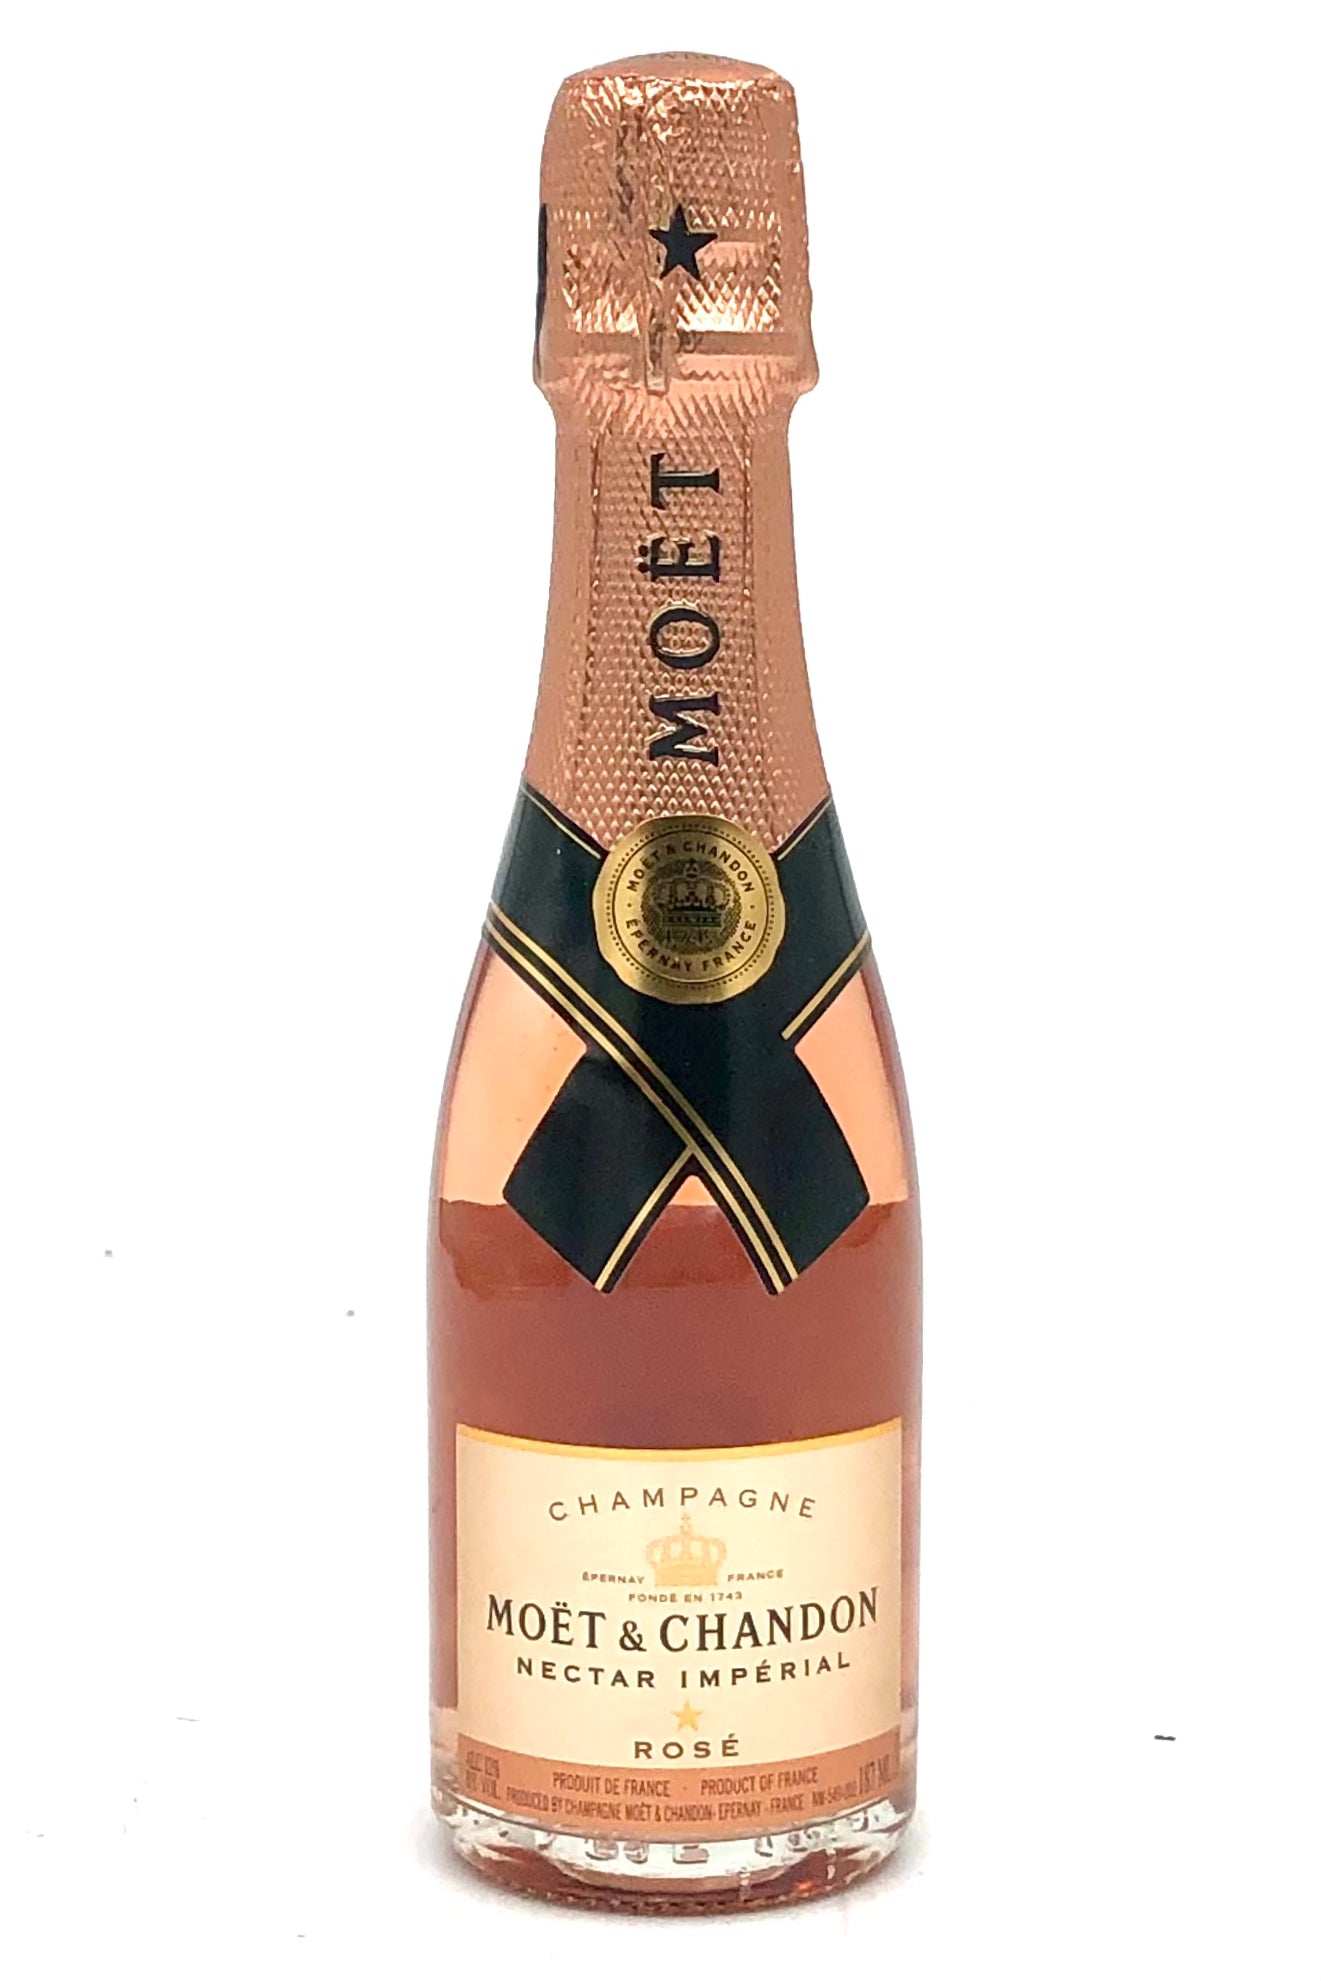 and Spirits Wines Blackwell\'s Celebrate Chandon Champagnes - & with Moet Sparkling Wines